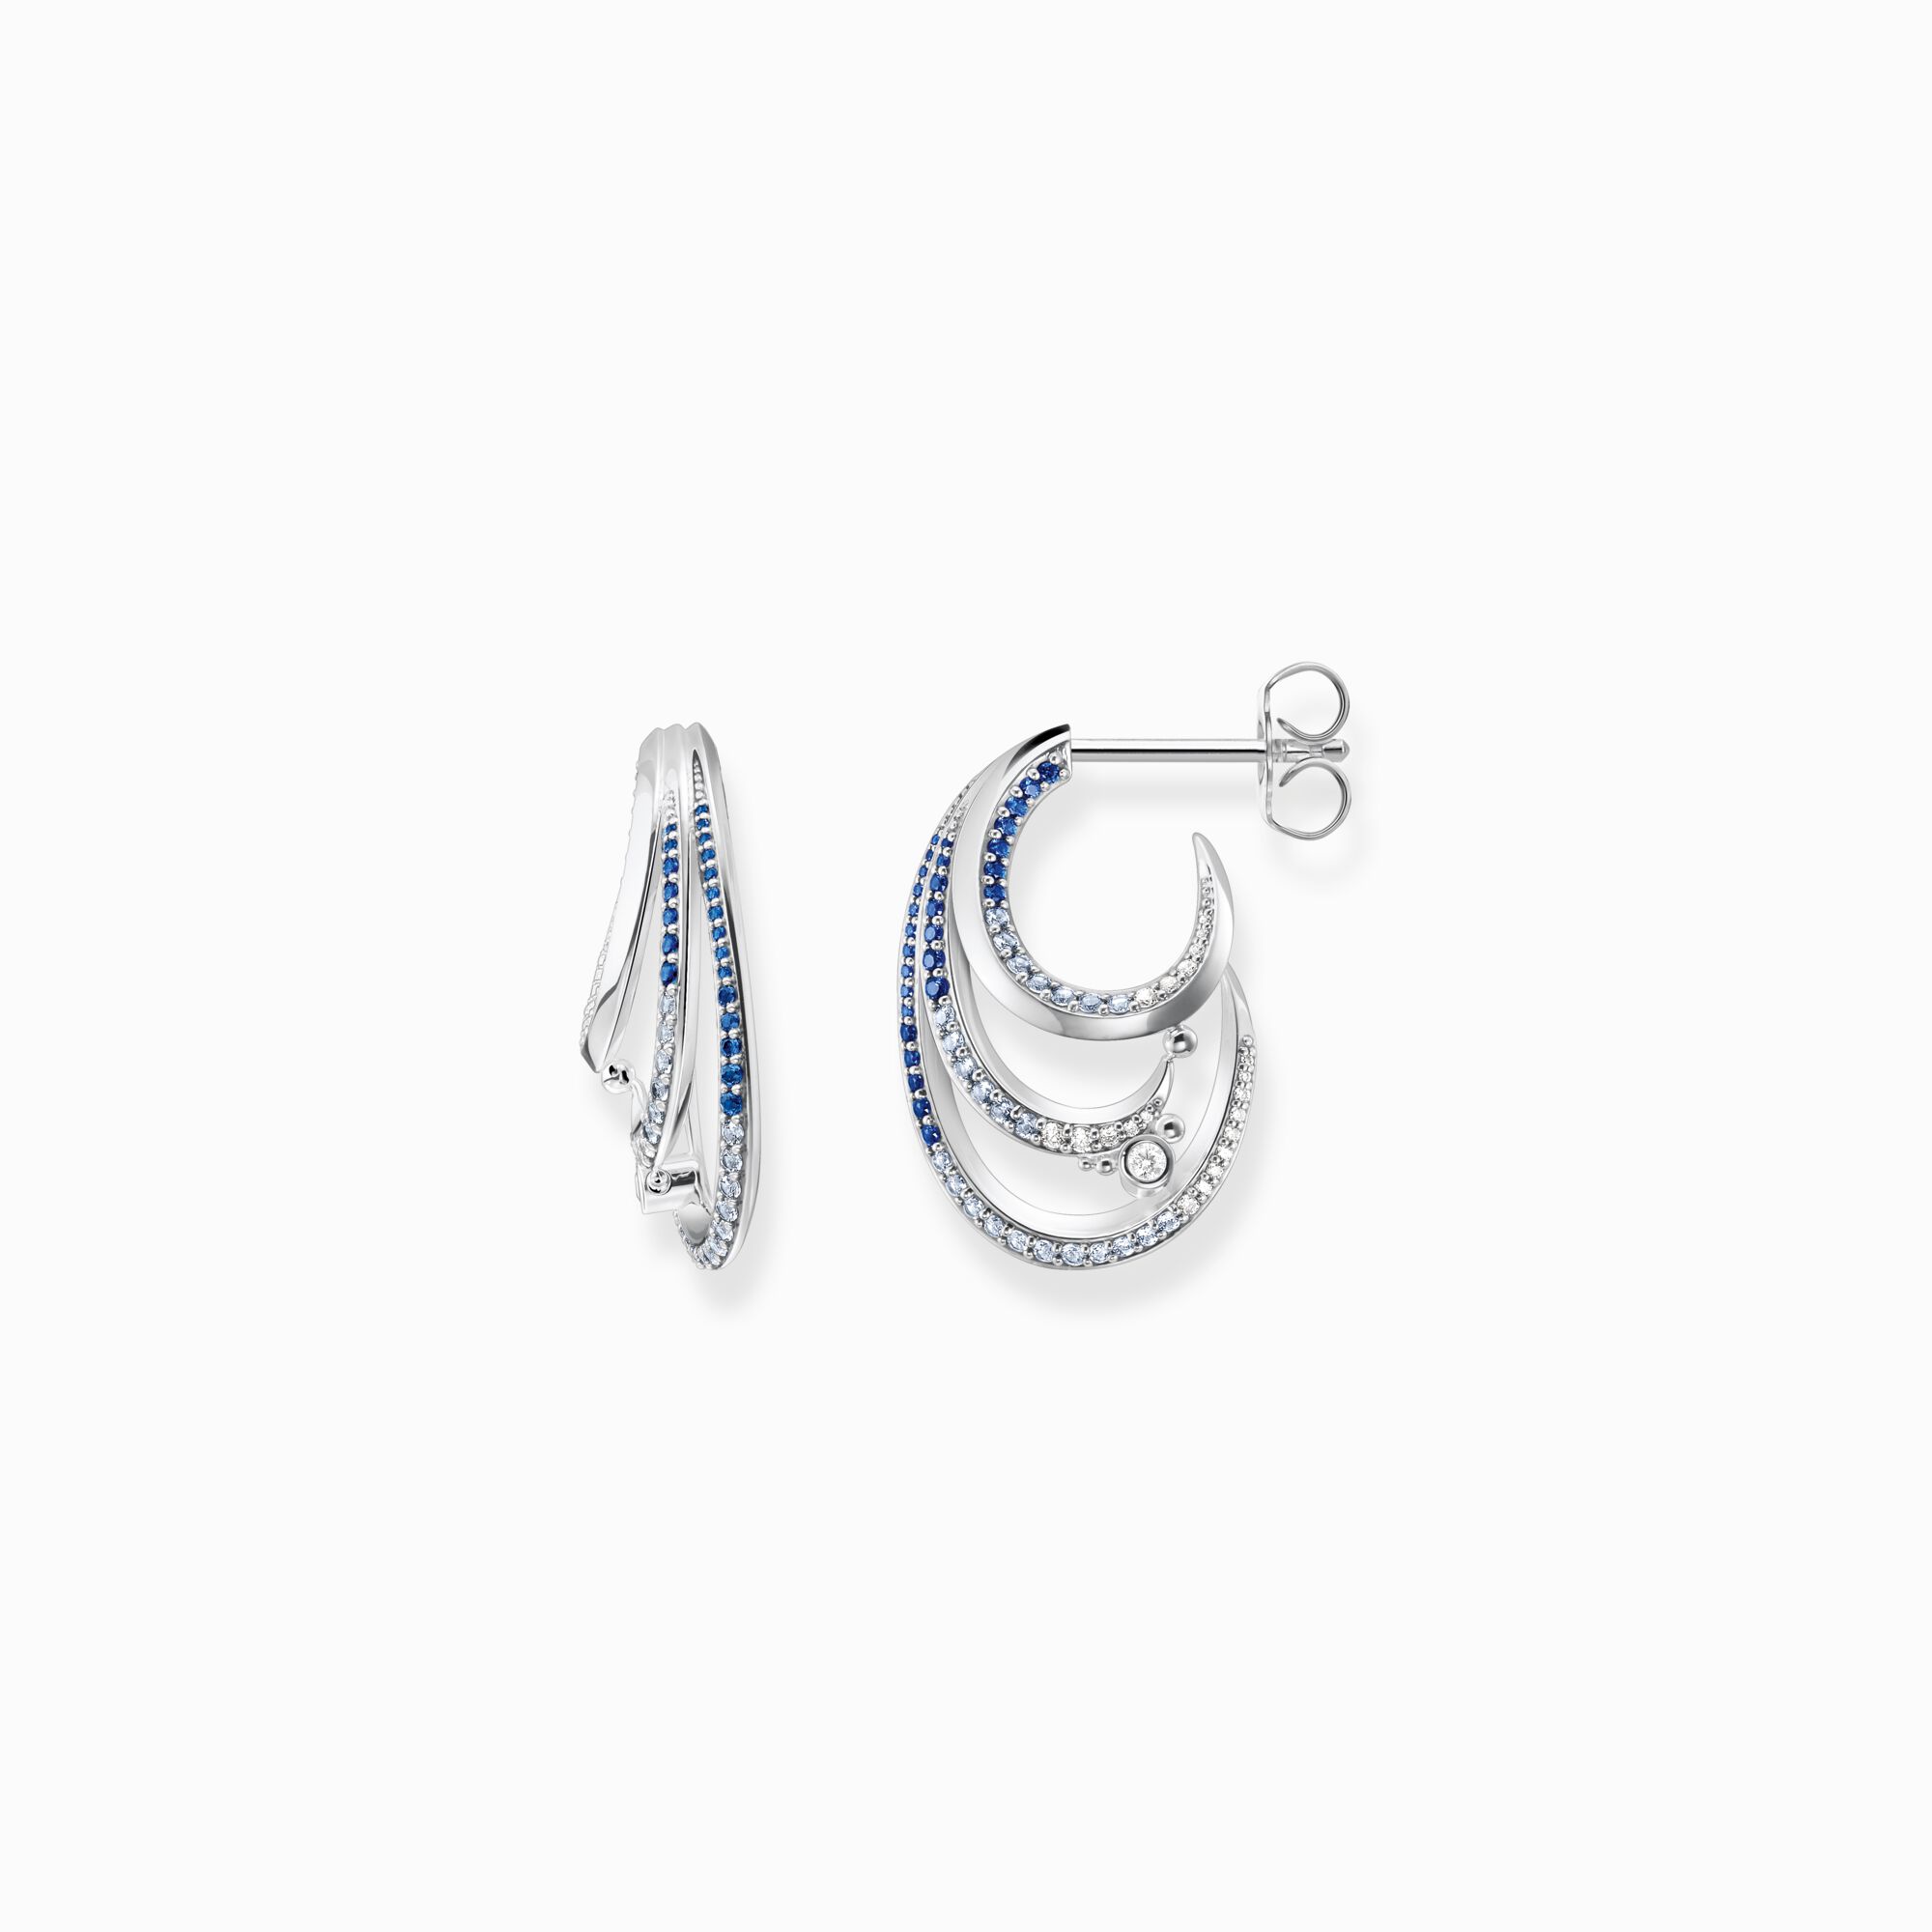 Hoop earrings wave with blue stones from the  collection in the THOMAS SABO online store